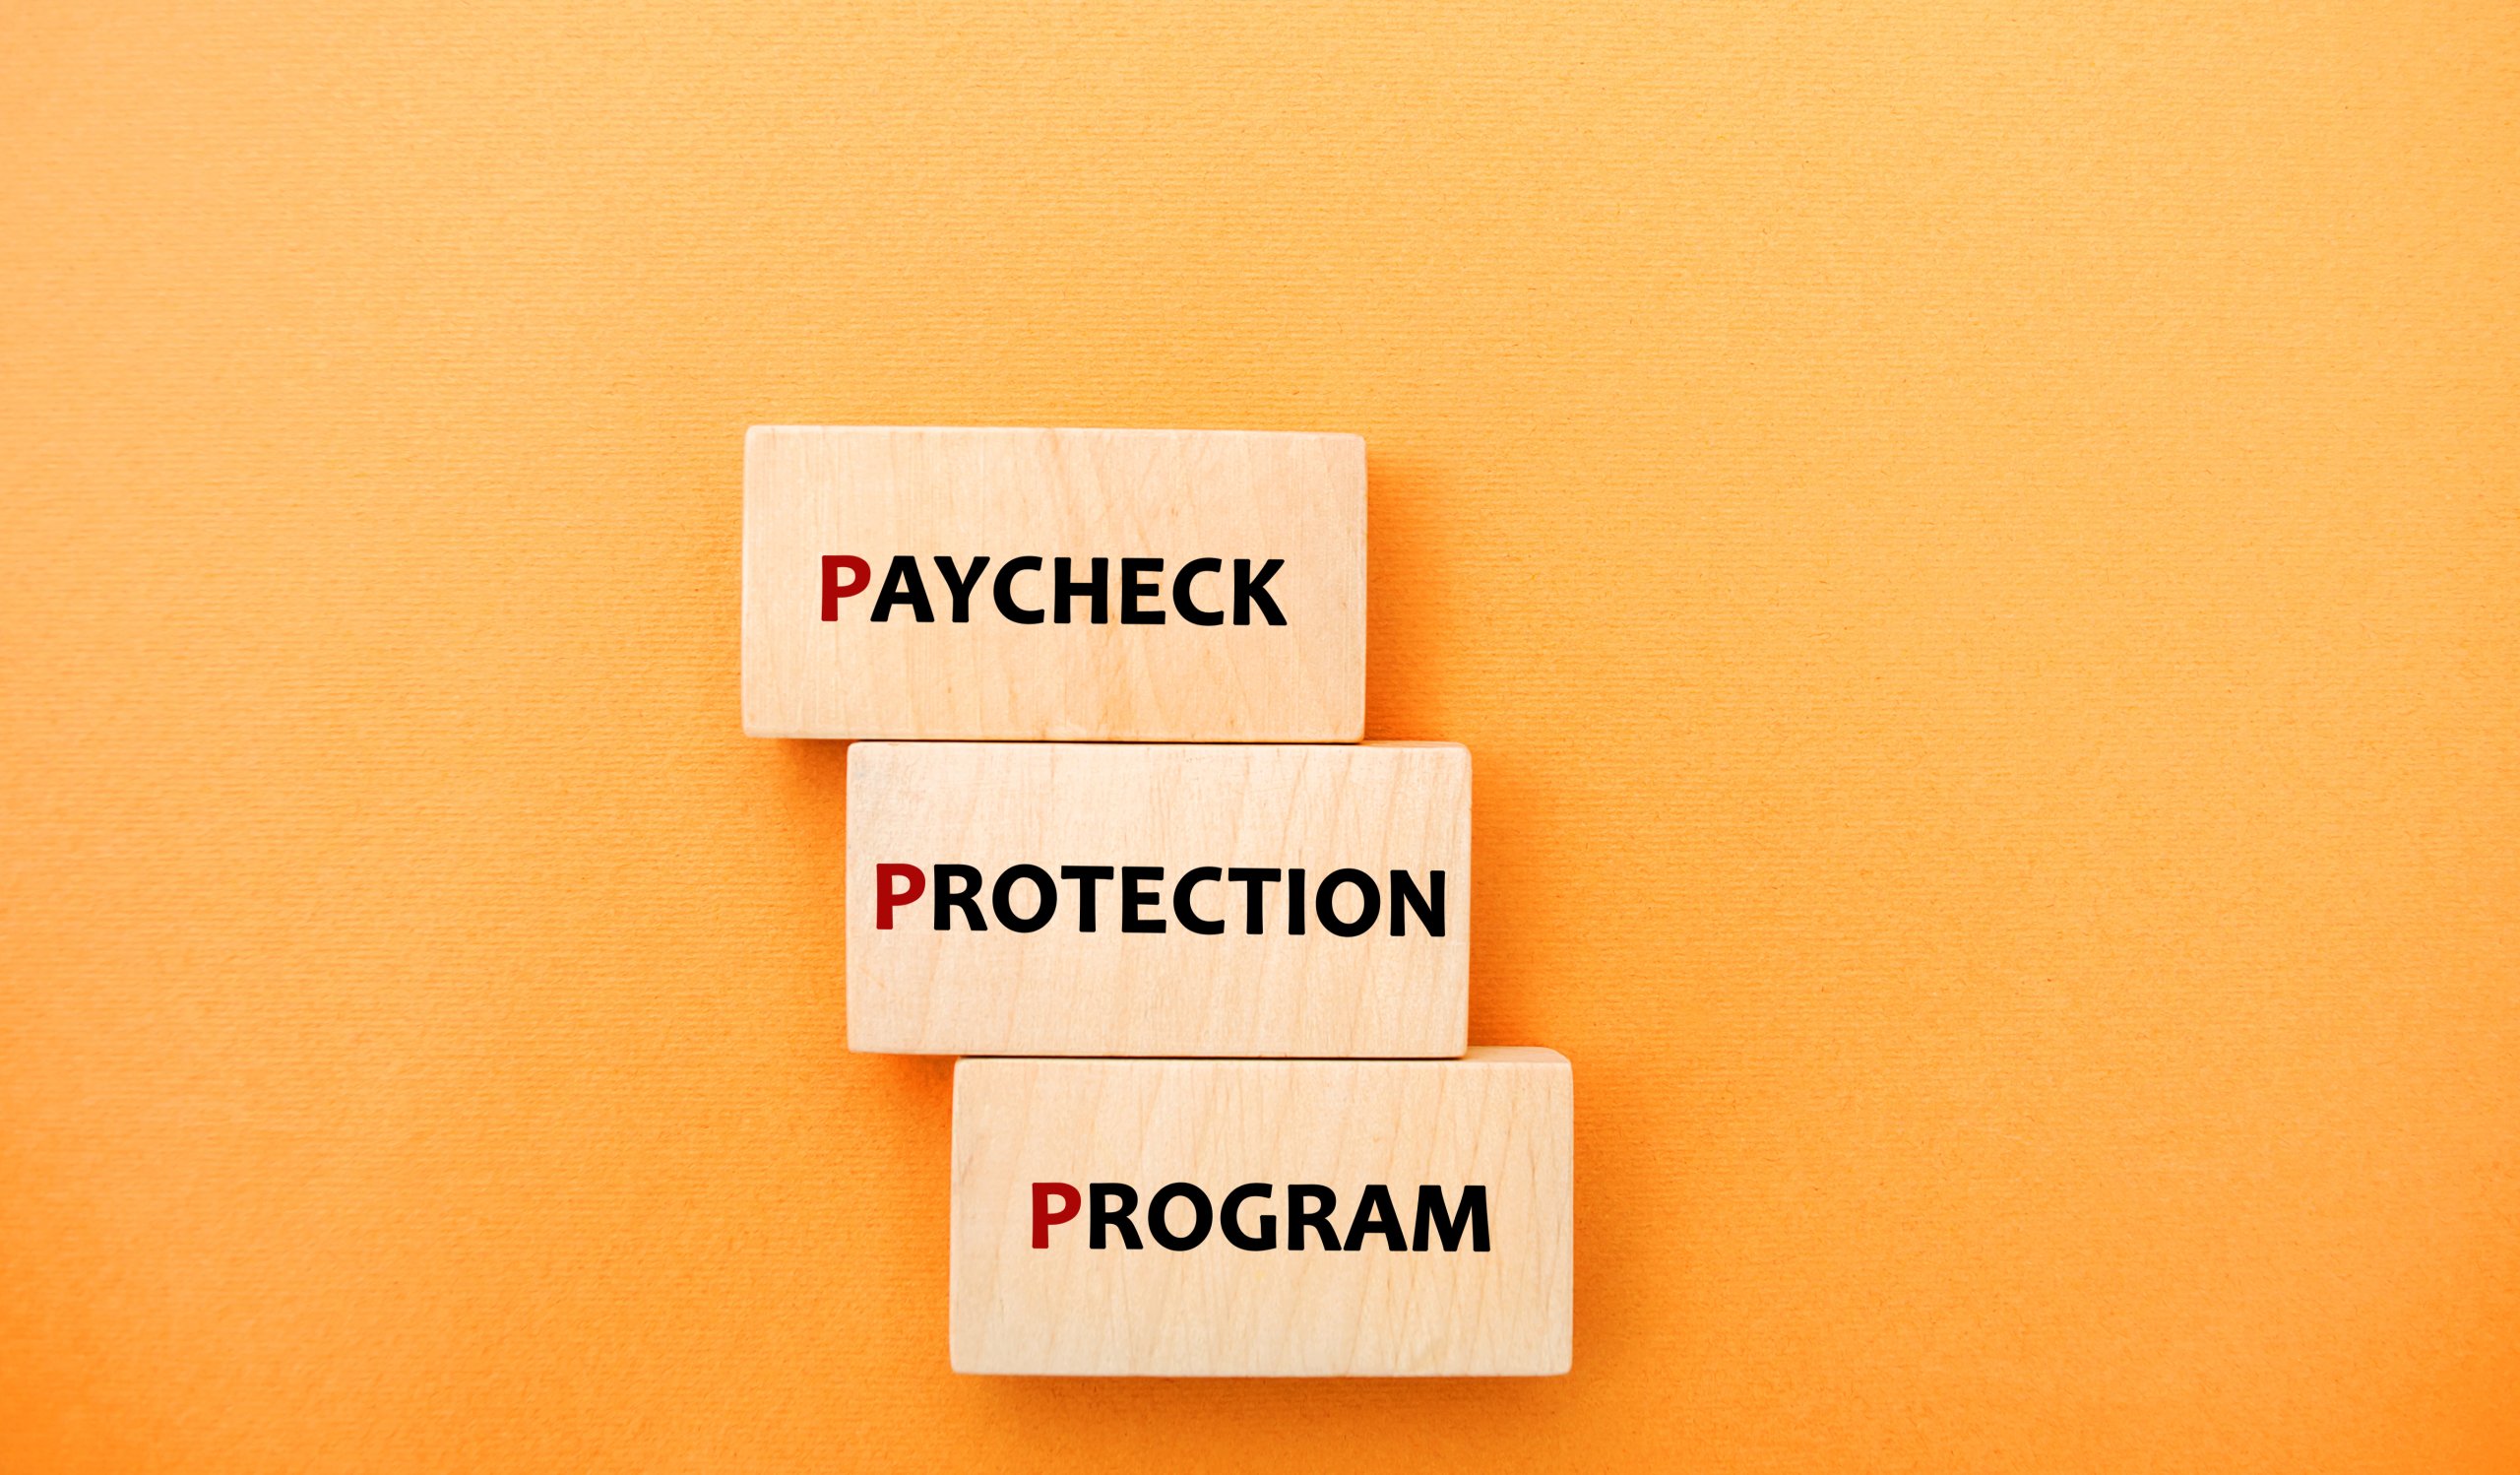 apply for PPP loan forgiveness paycheck protection program